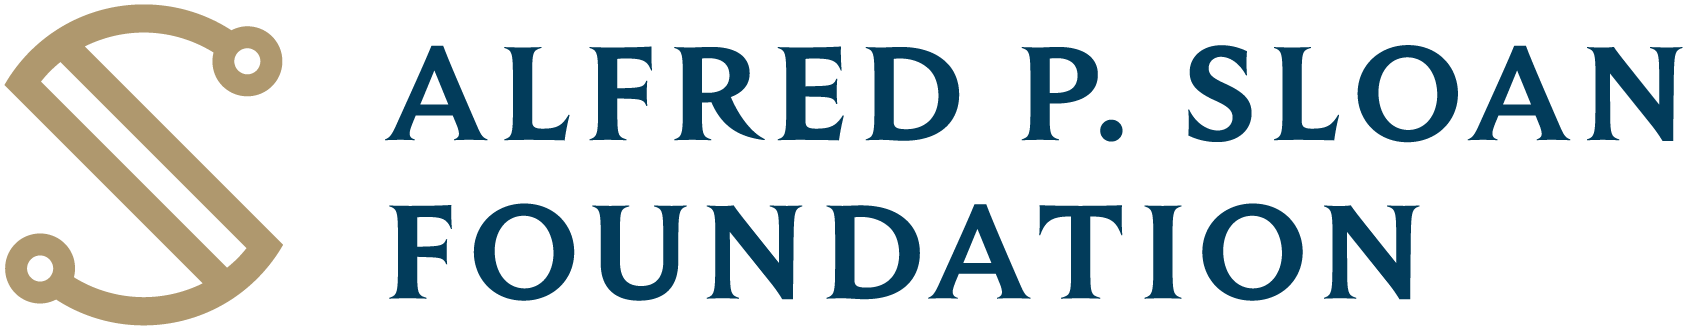 alfred-p-sloan-foundation-logo.png